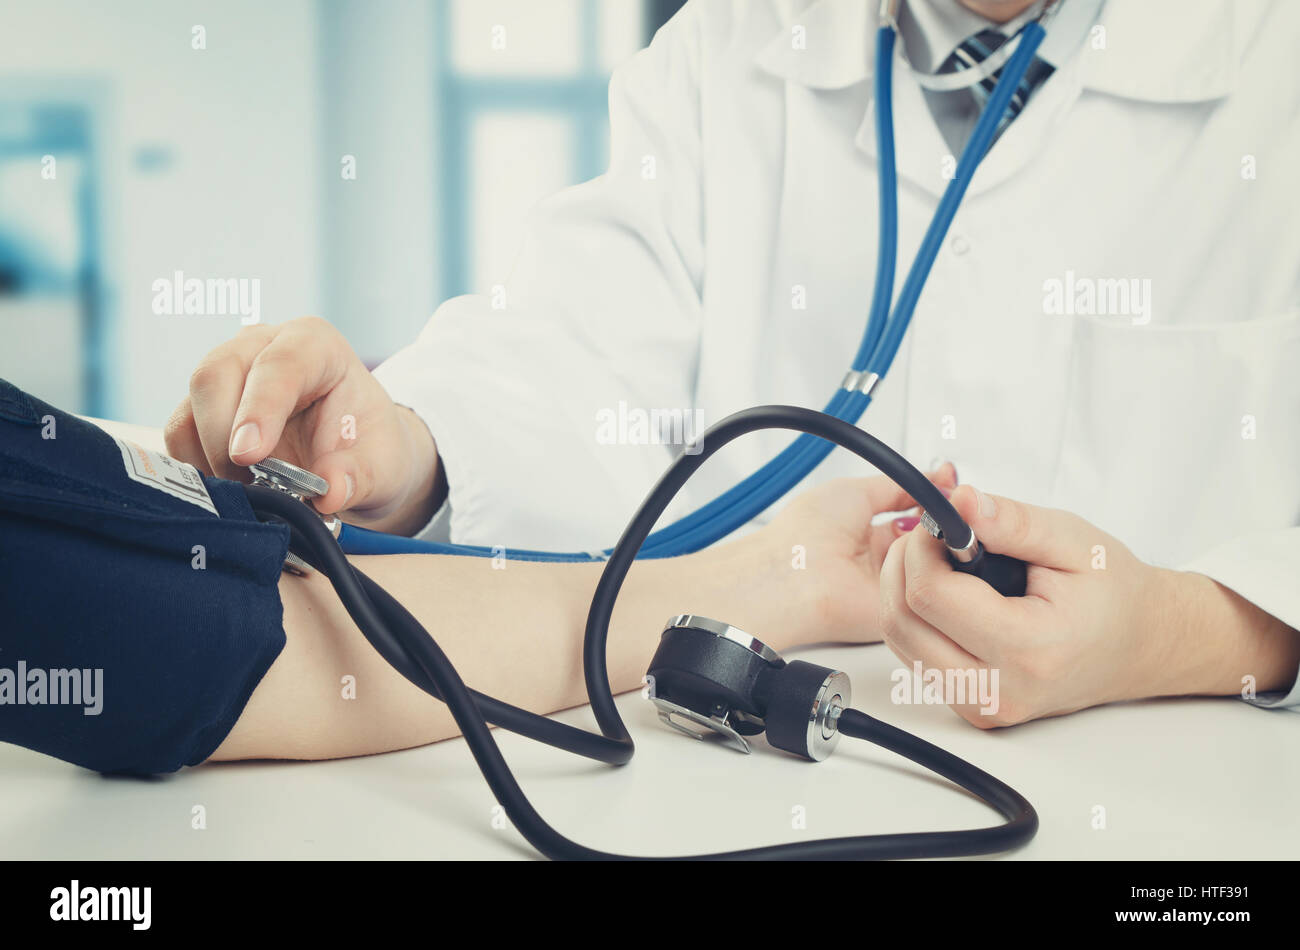 Doctor measures the pressure of the patient. doctor patient blood pressure clinic sphygmomanometer medical worker concept Stock Photo